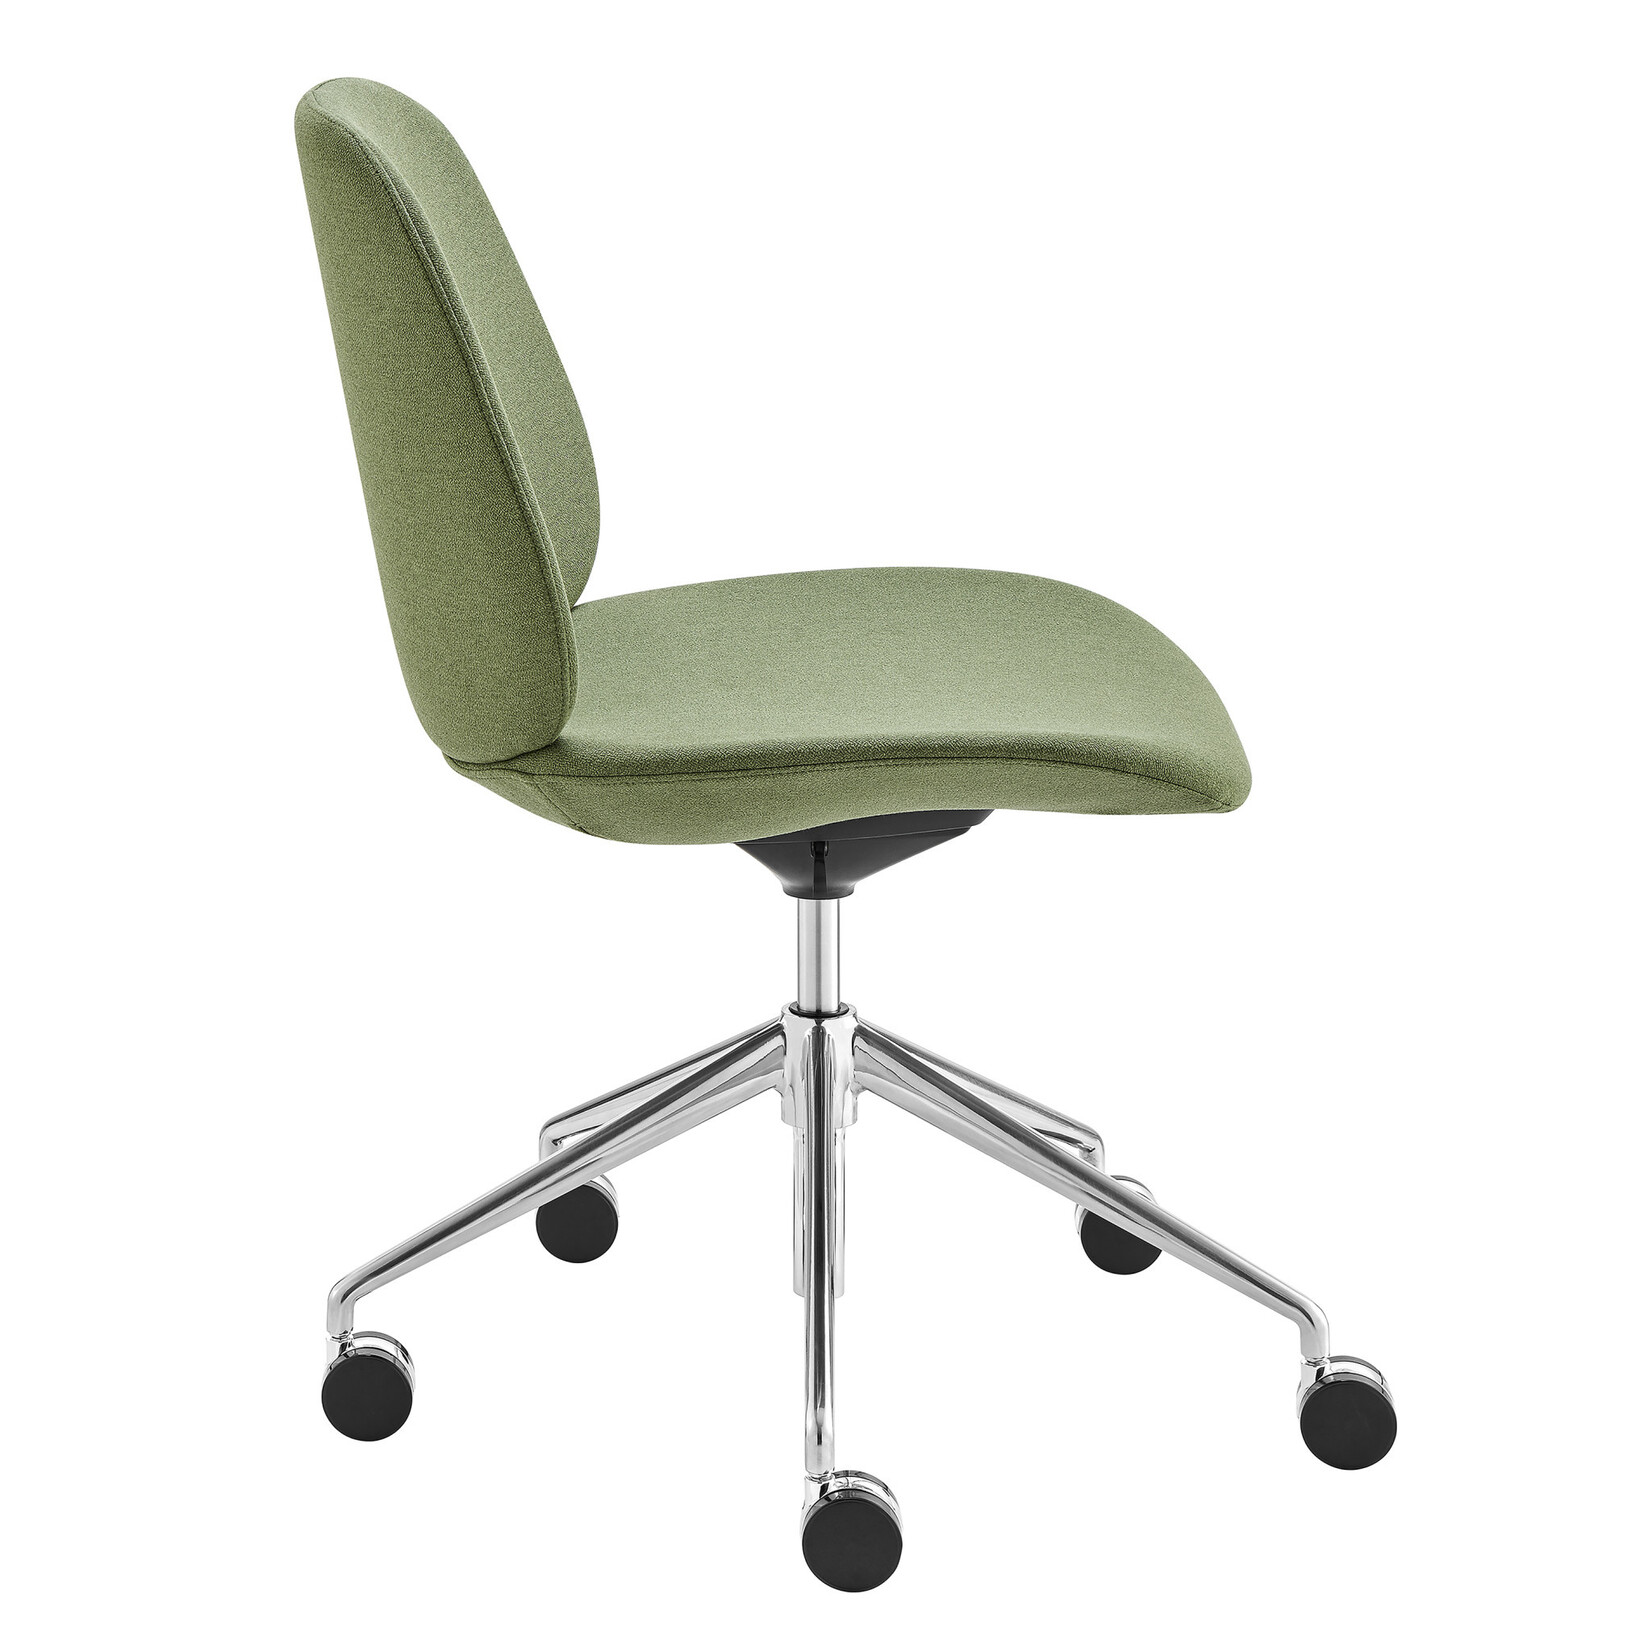 EuroStyle Lyle Office Chair Green